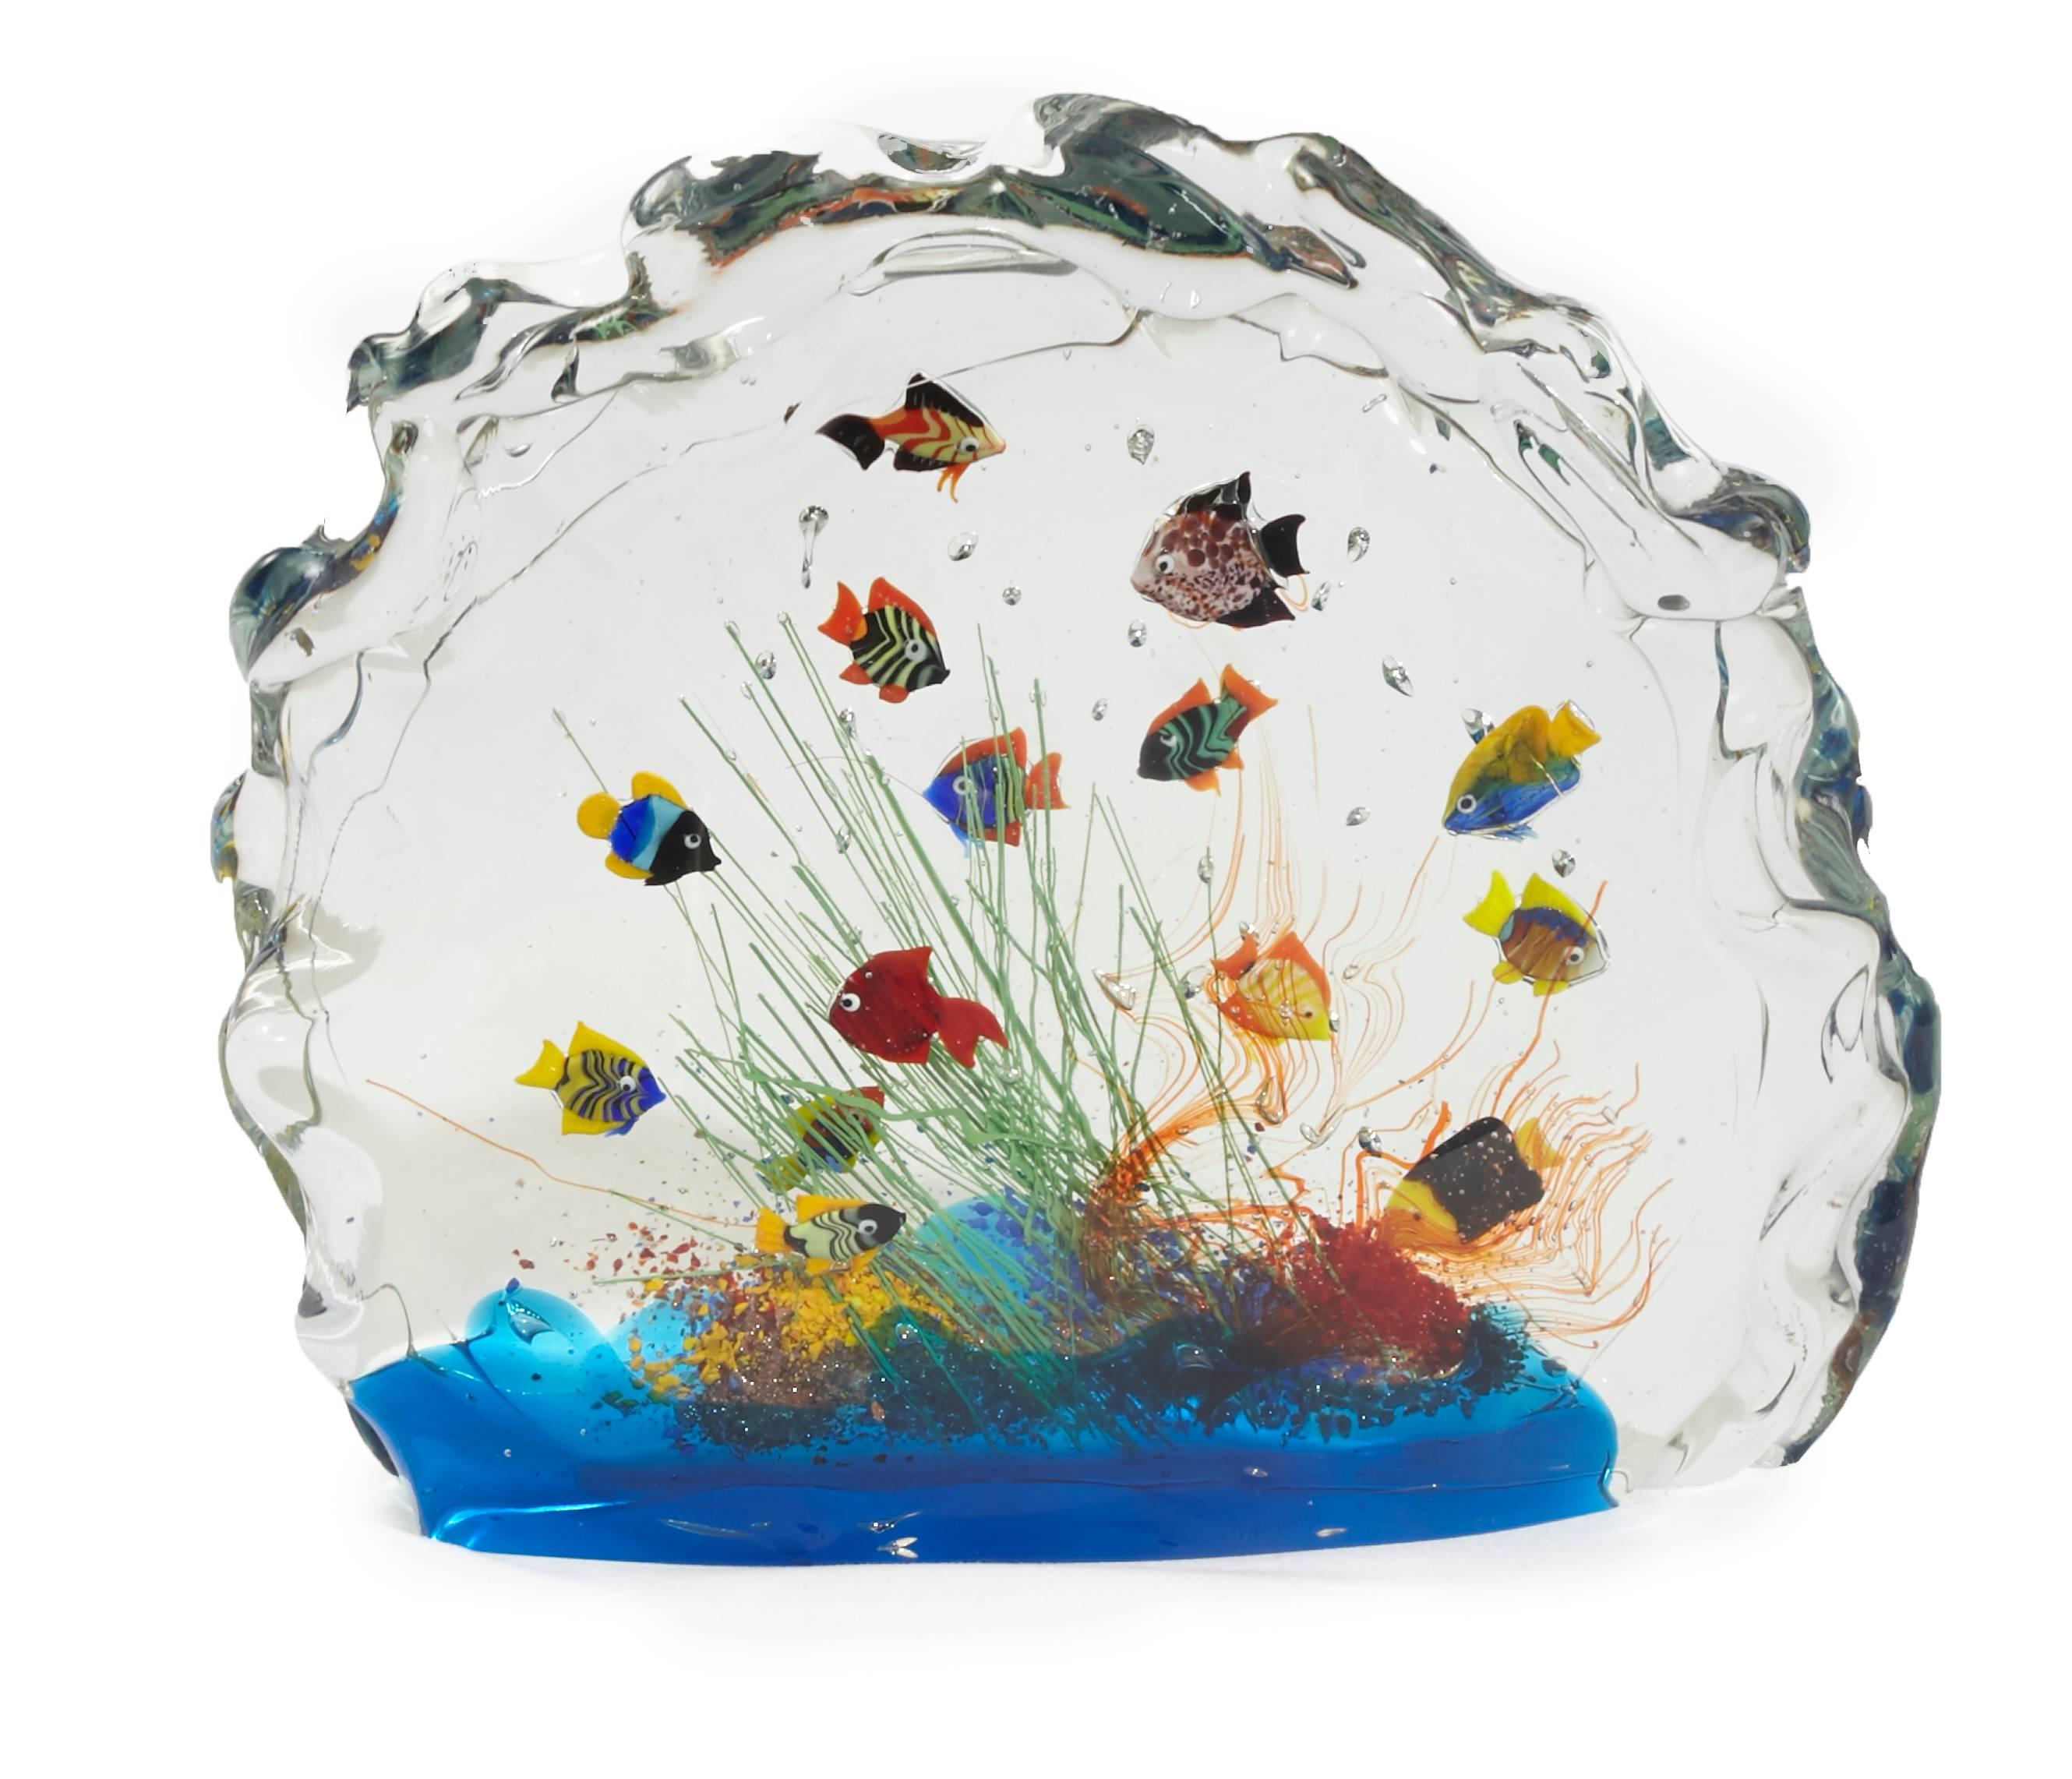 Handmade Murano glass aquarium holds 13 colorful fish, with undersea plant life. A statement piece that will enhance any decor.